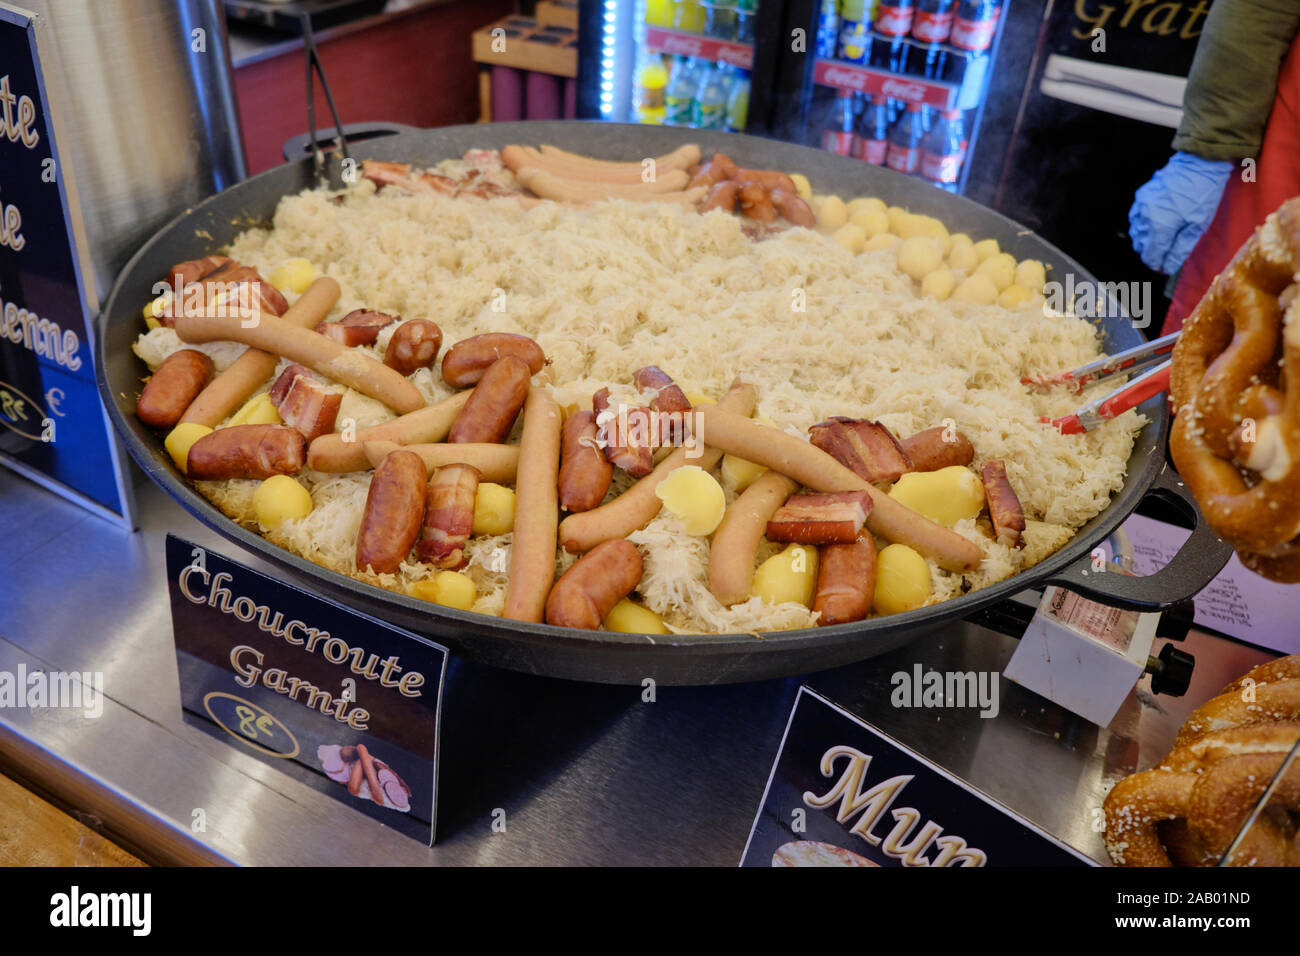 Large skillet full of Choucroute Garnie (Sour kraut) on display and for sale at a food stall at the Strasbourg Christmas Market Stock Photo